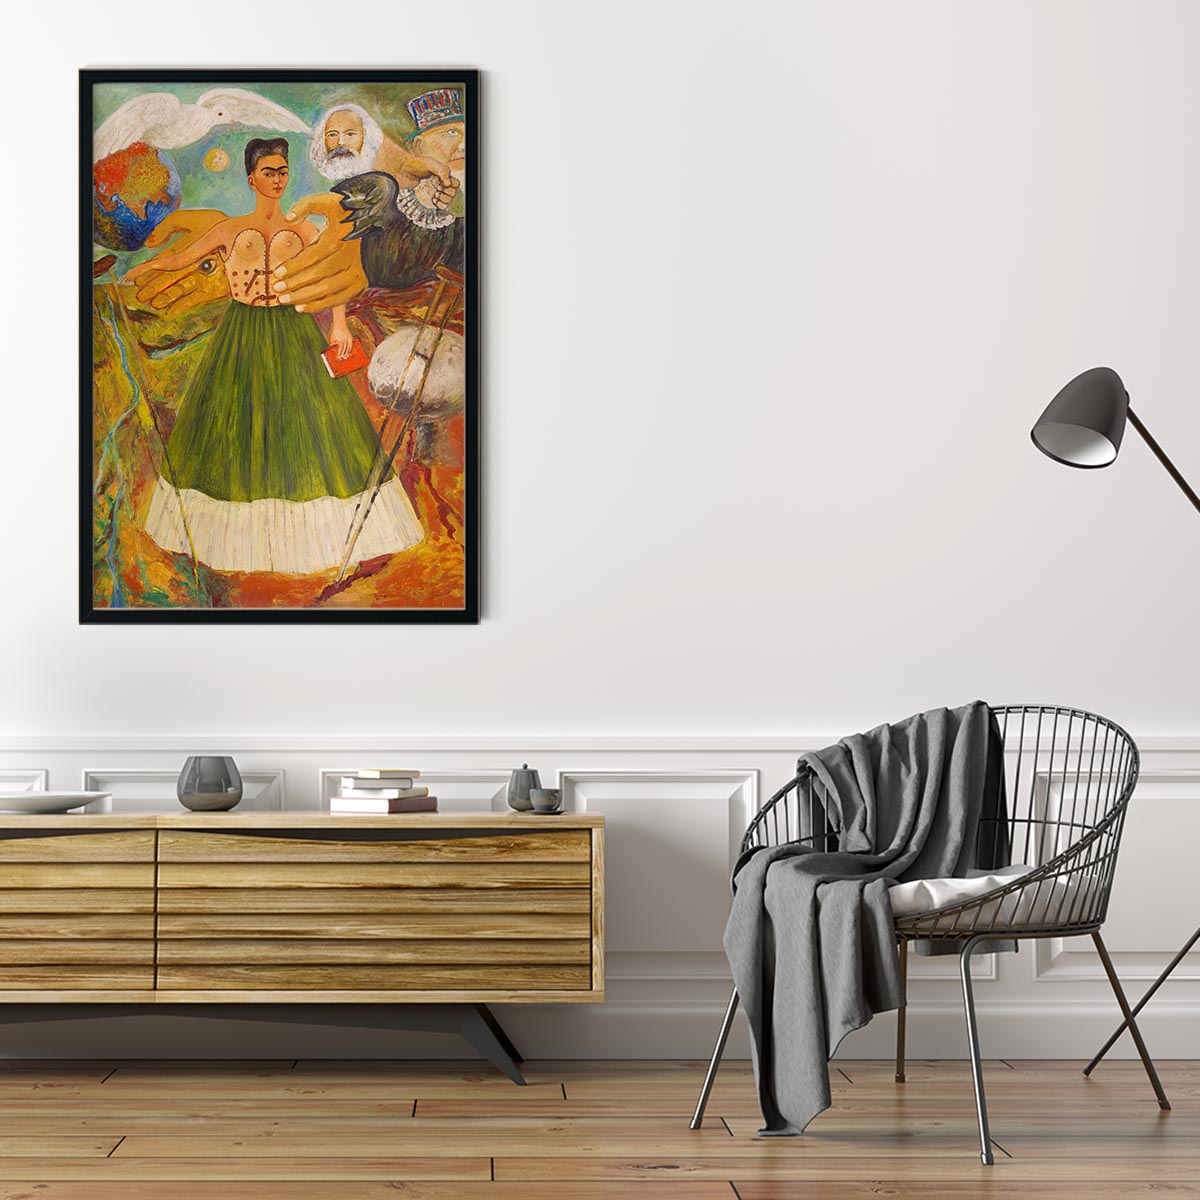 Marxism will give health to the Ill Art Print by Frida Kahlo